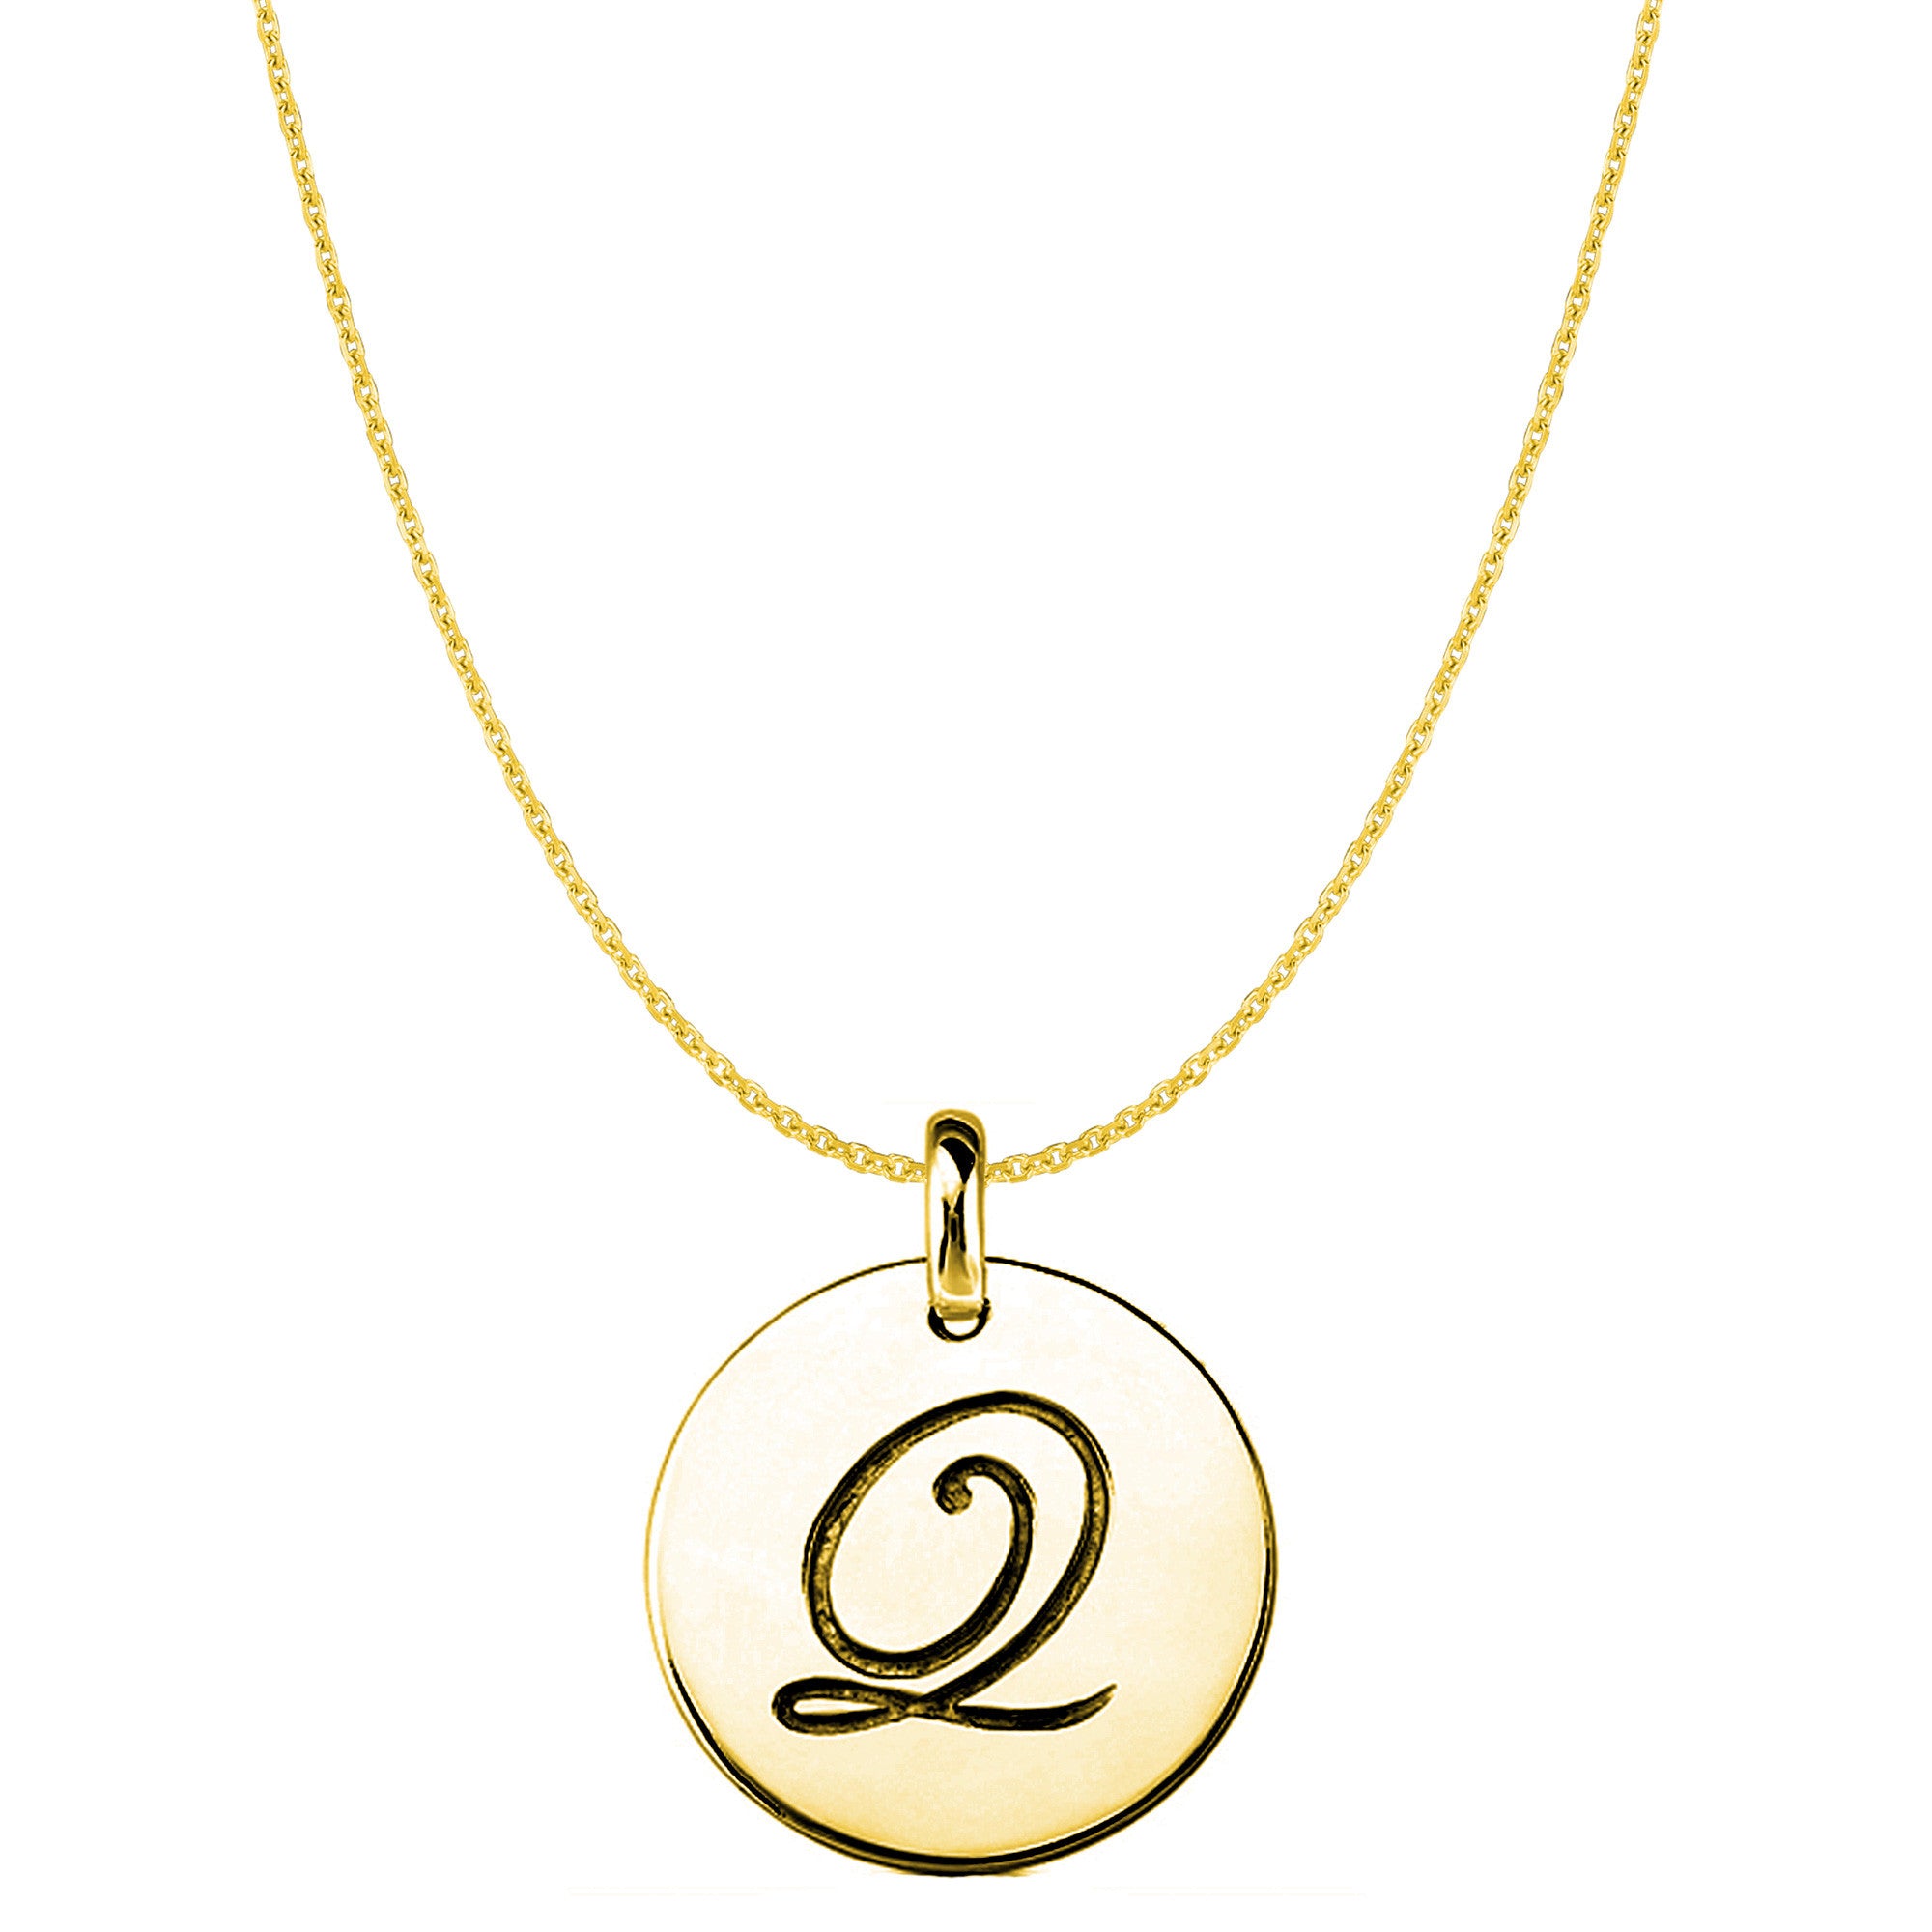 "Q" 14K Yellow Gold Script Engraved Initial Disk Pendant fine designer jewelry for men and women